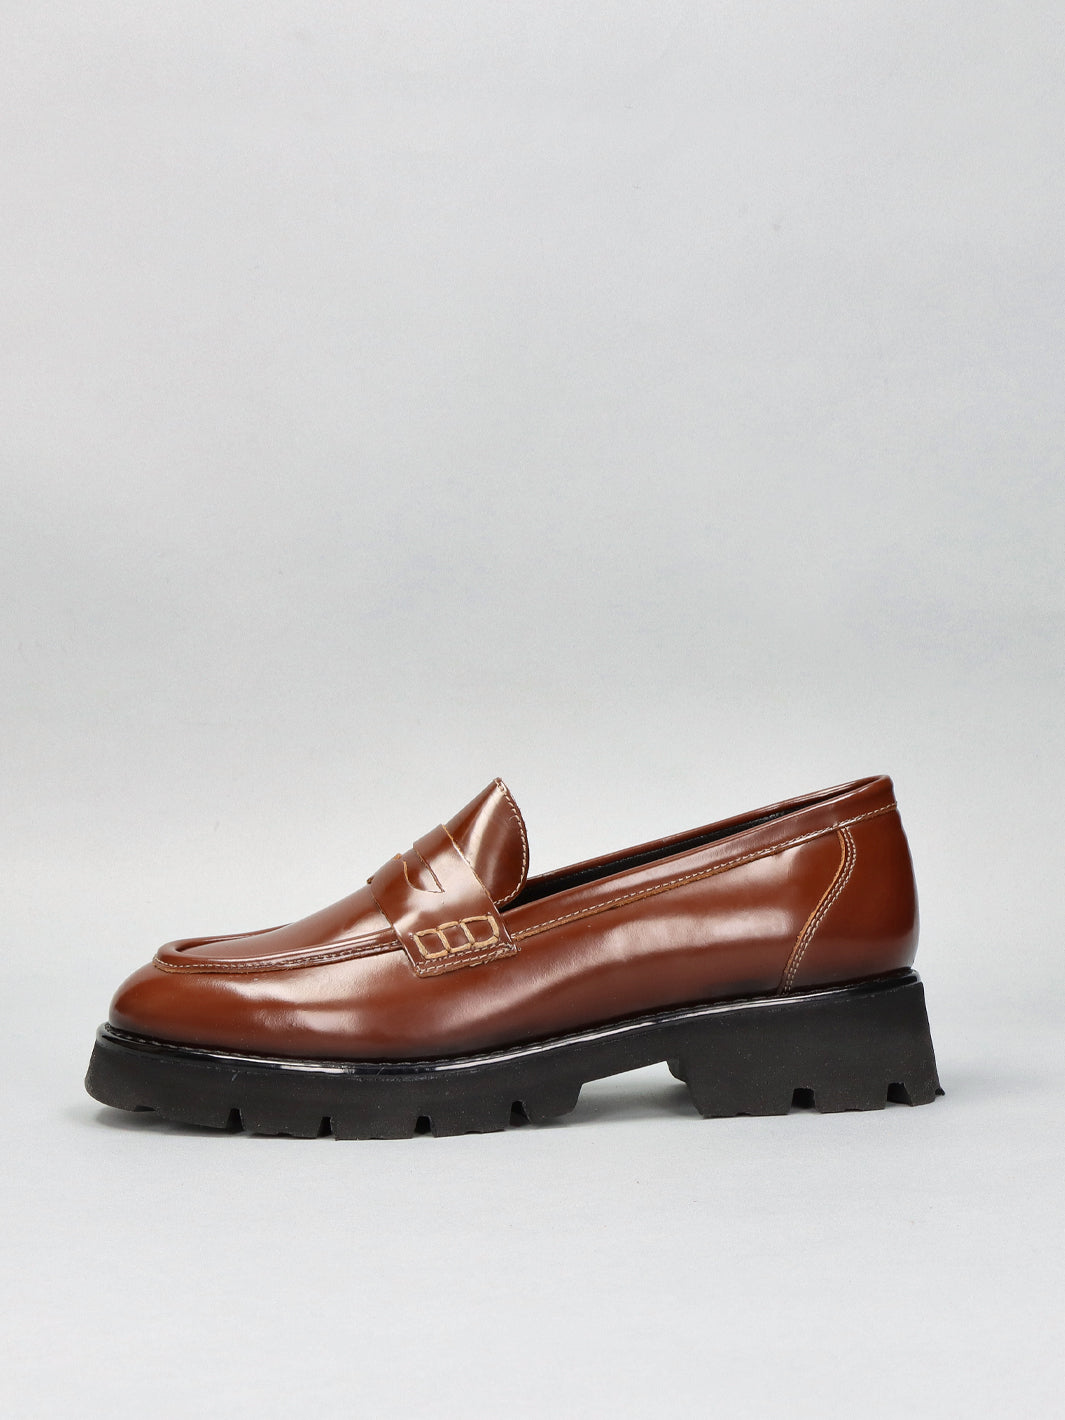 LEATHER LOW SHOES - BROWN